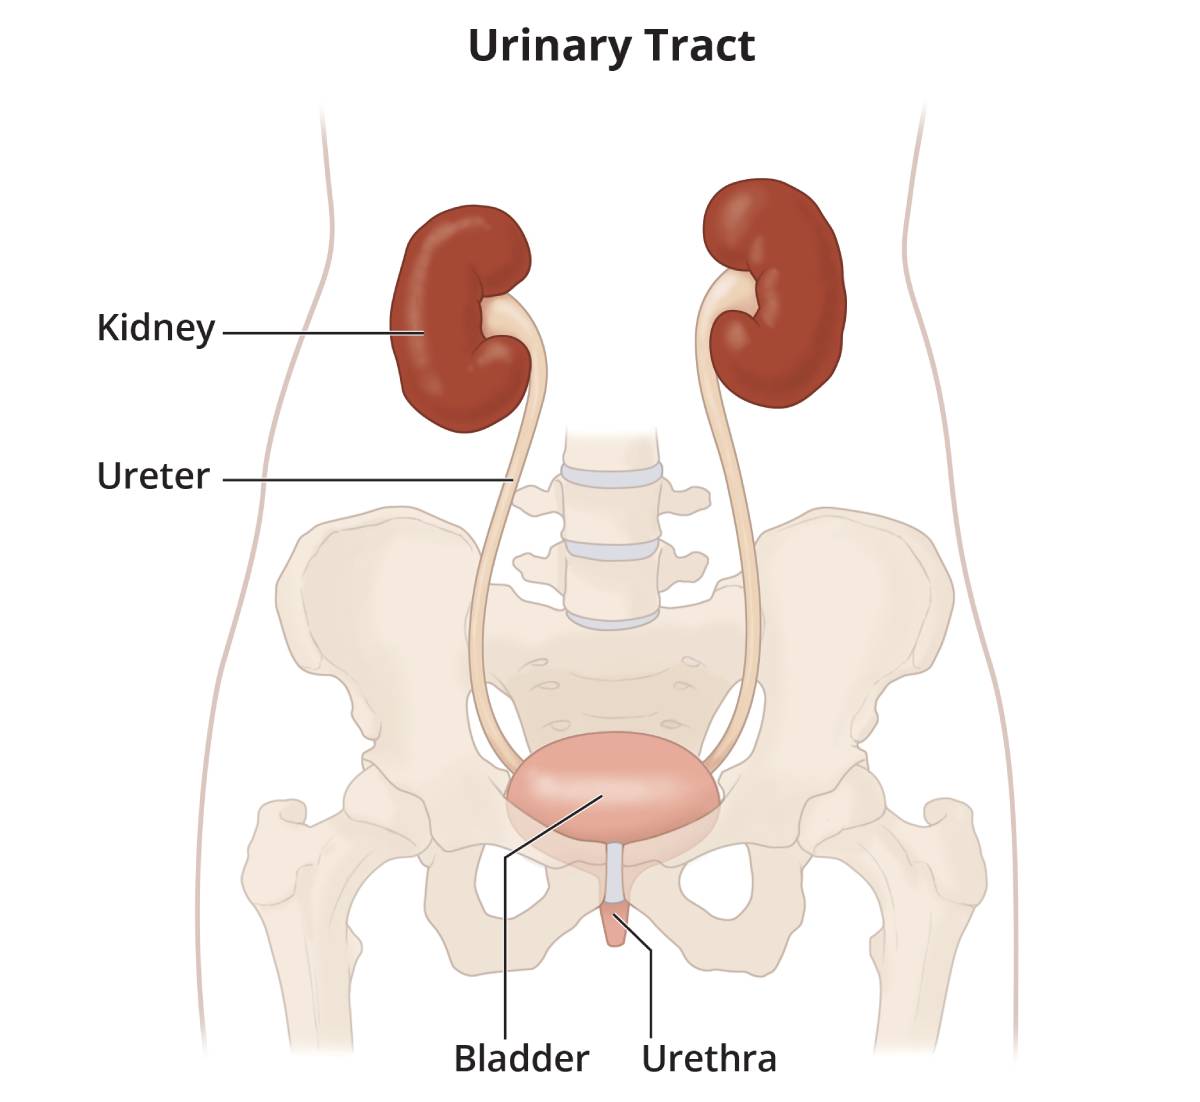 The urinary tract, showing the kidneys, ureters, bladder, and urethra.